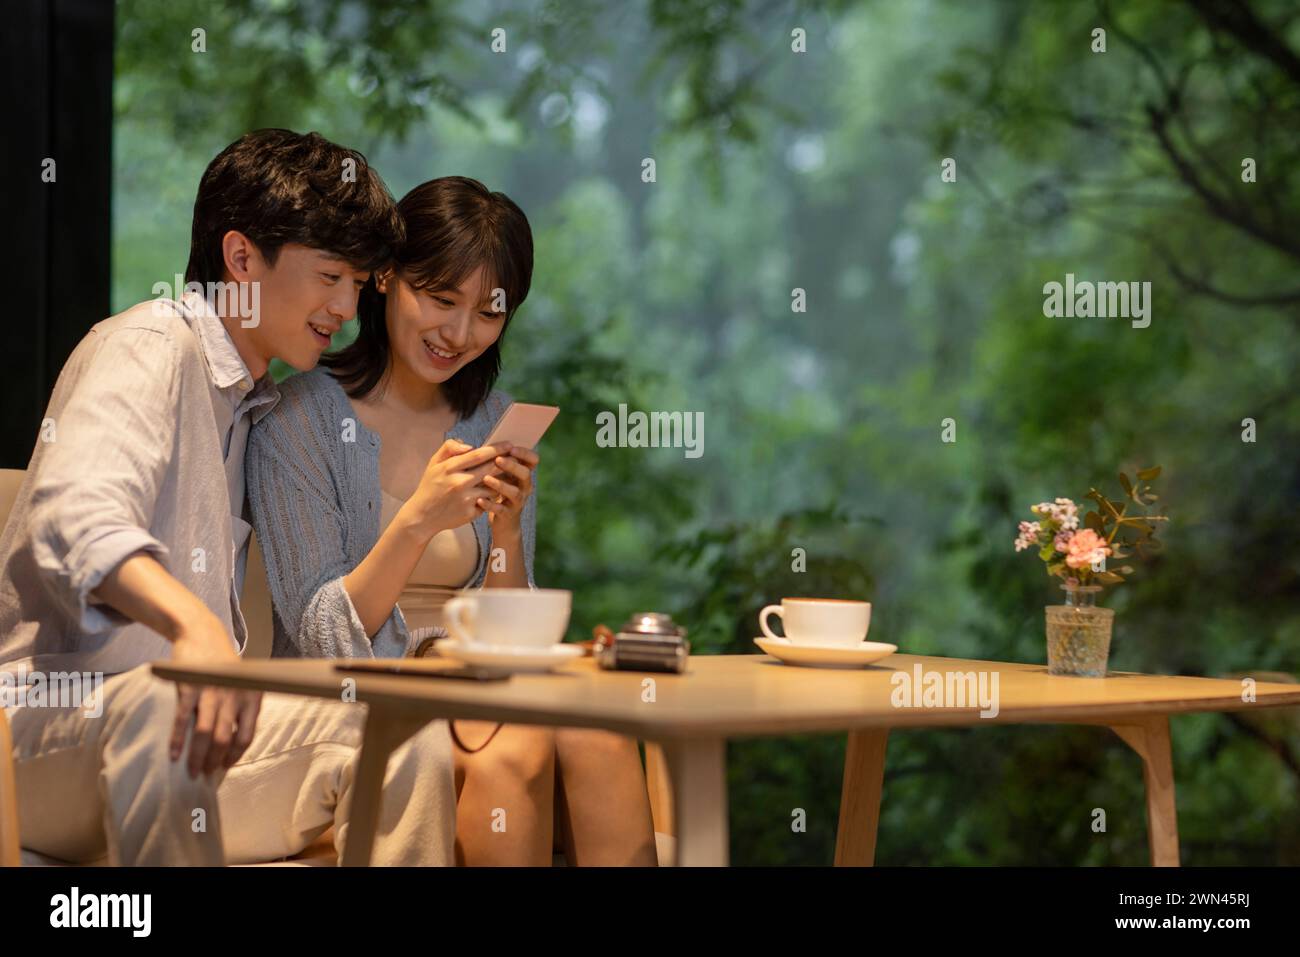 Young couple dating in café Stock Photo